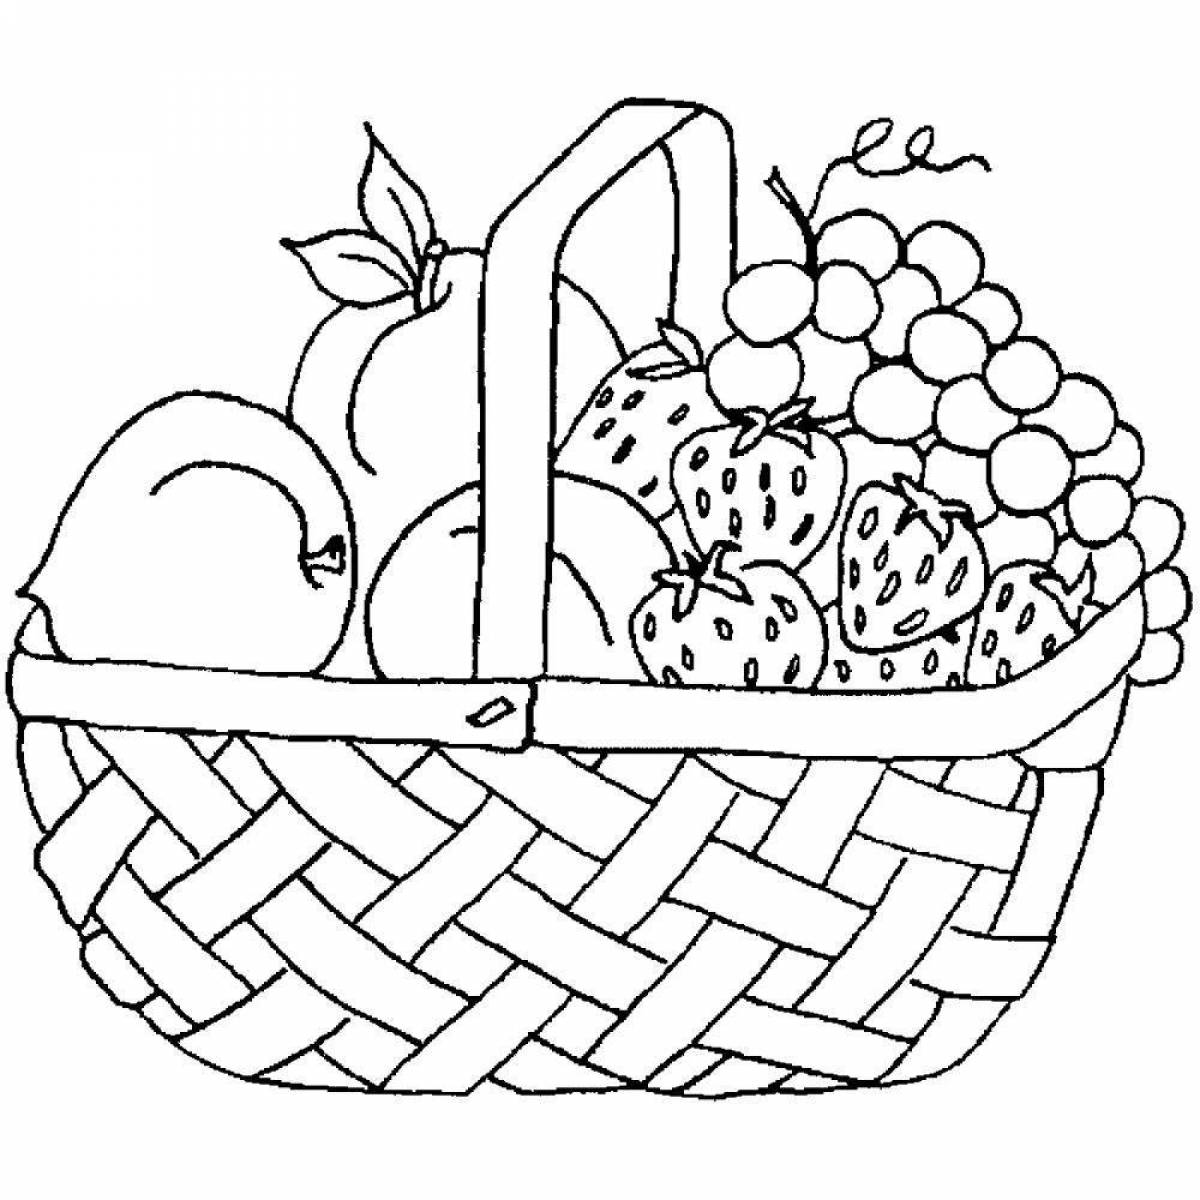 Still life coloring book for 10 year olds